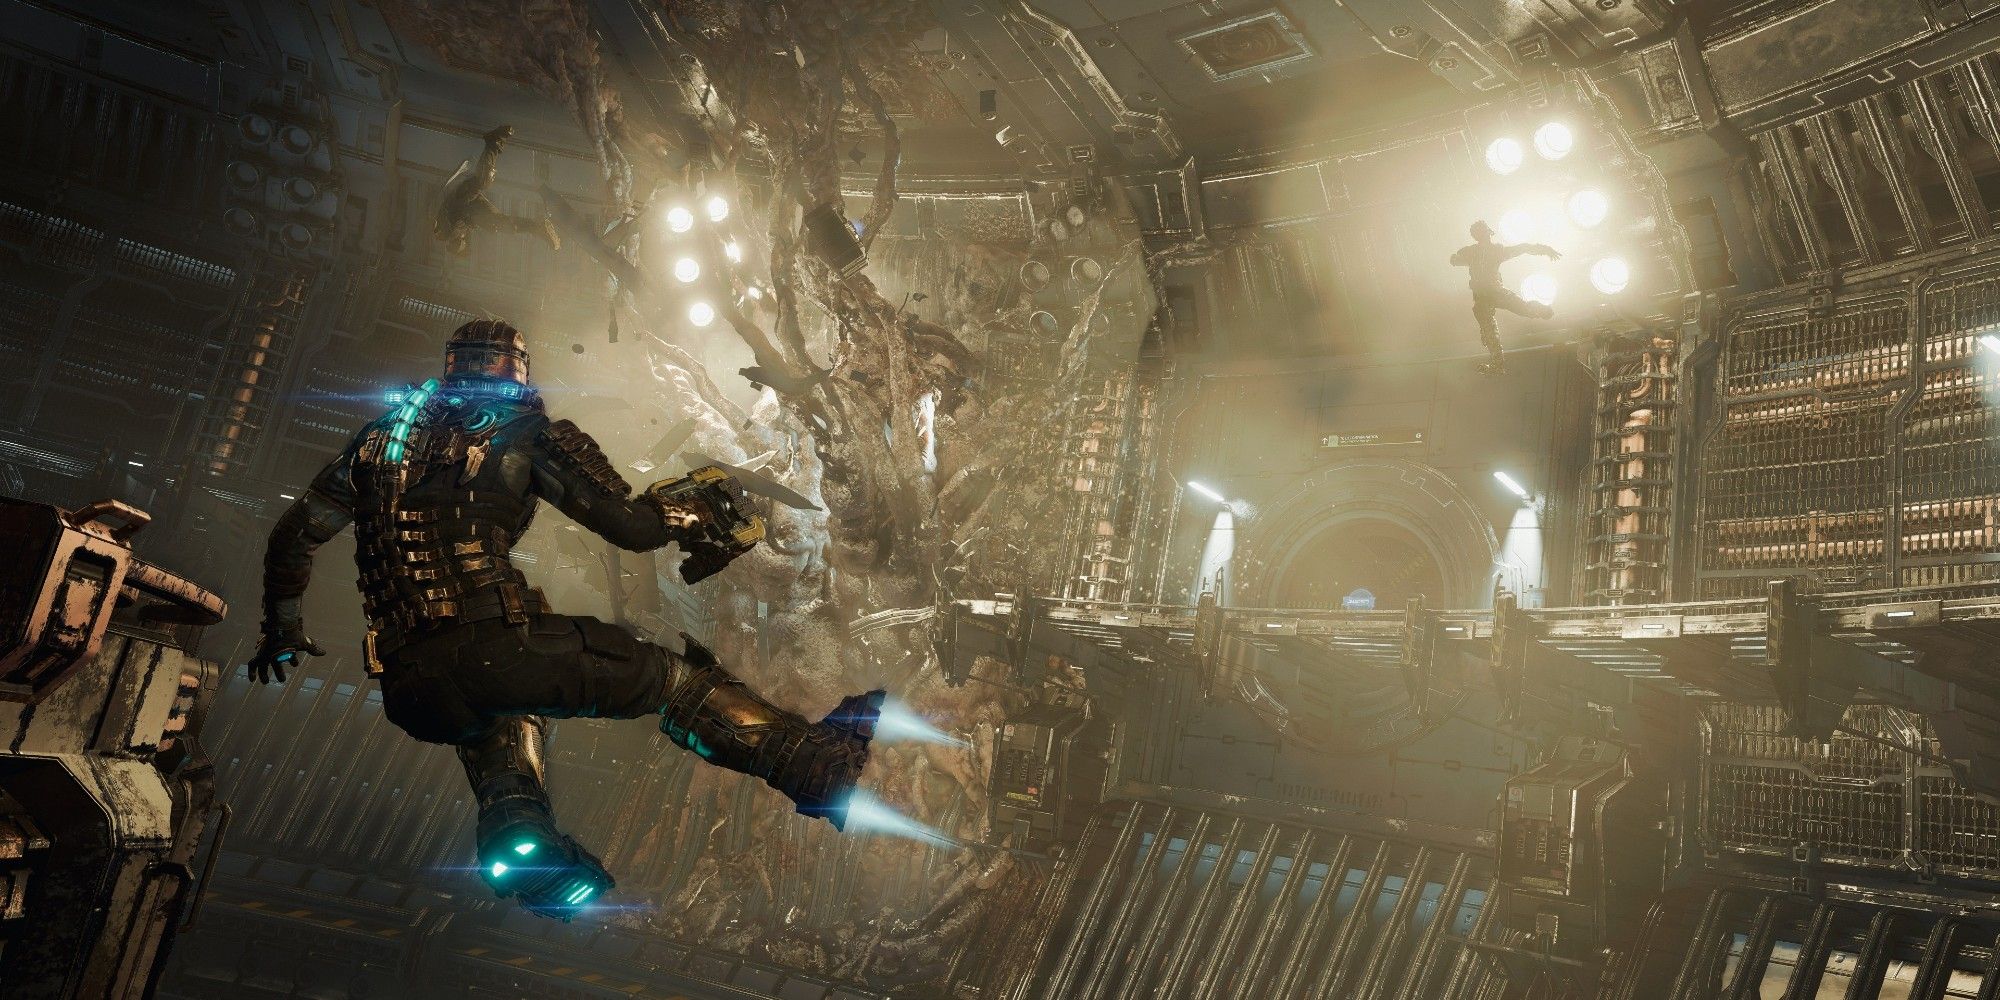 Dead Space Remake Official Screenshot From Xbox Store Page Featuring Flying Isaac Clarke